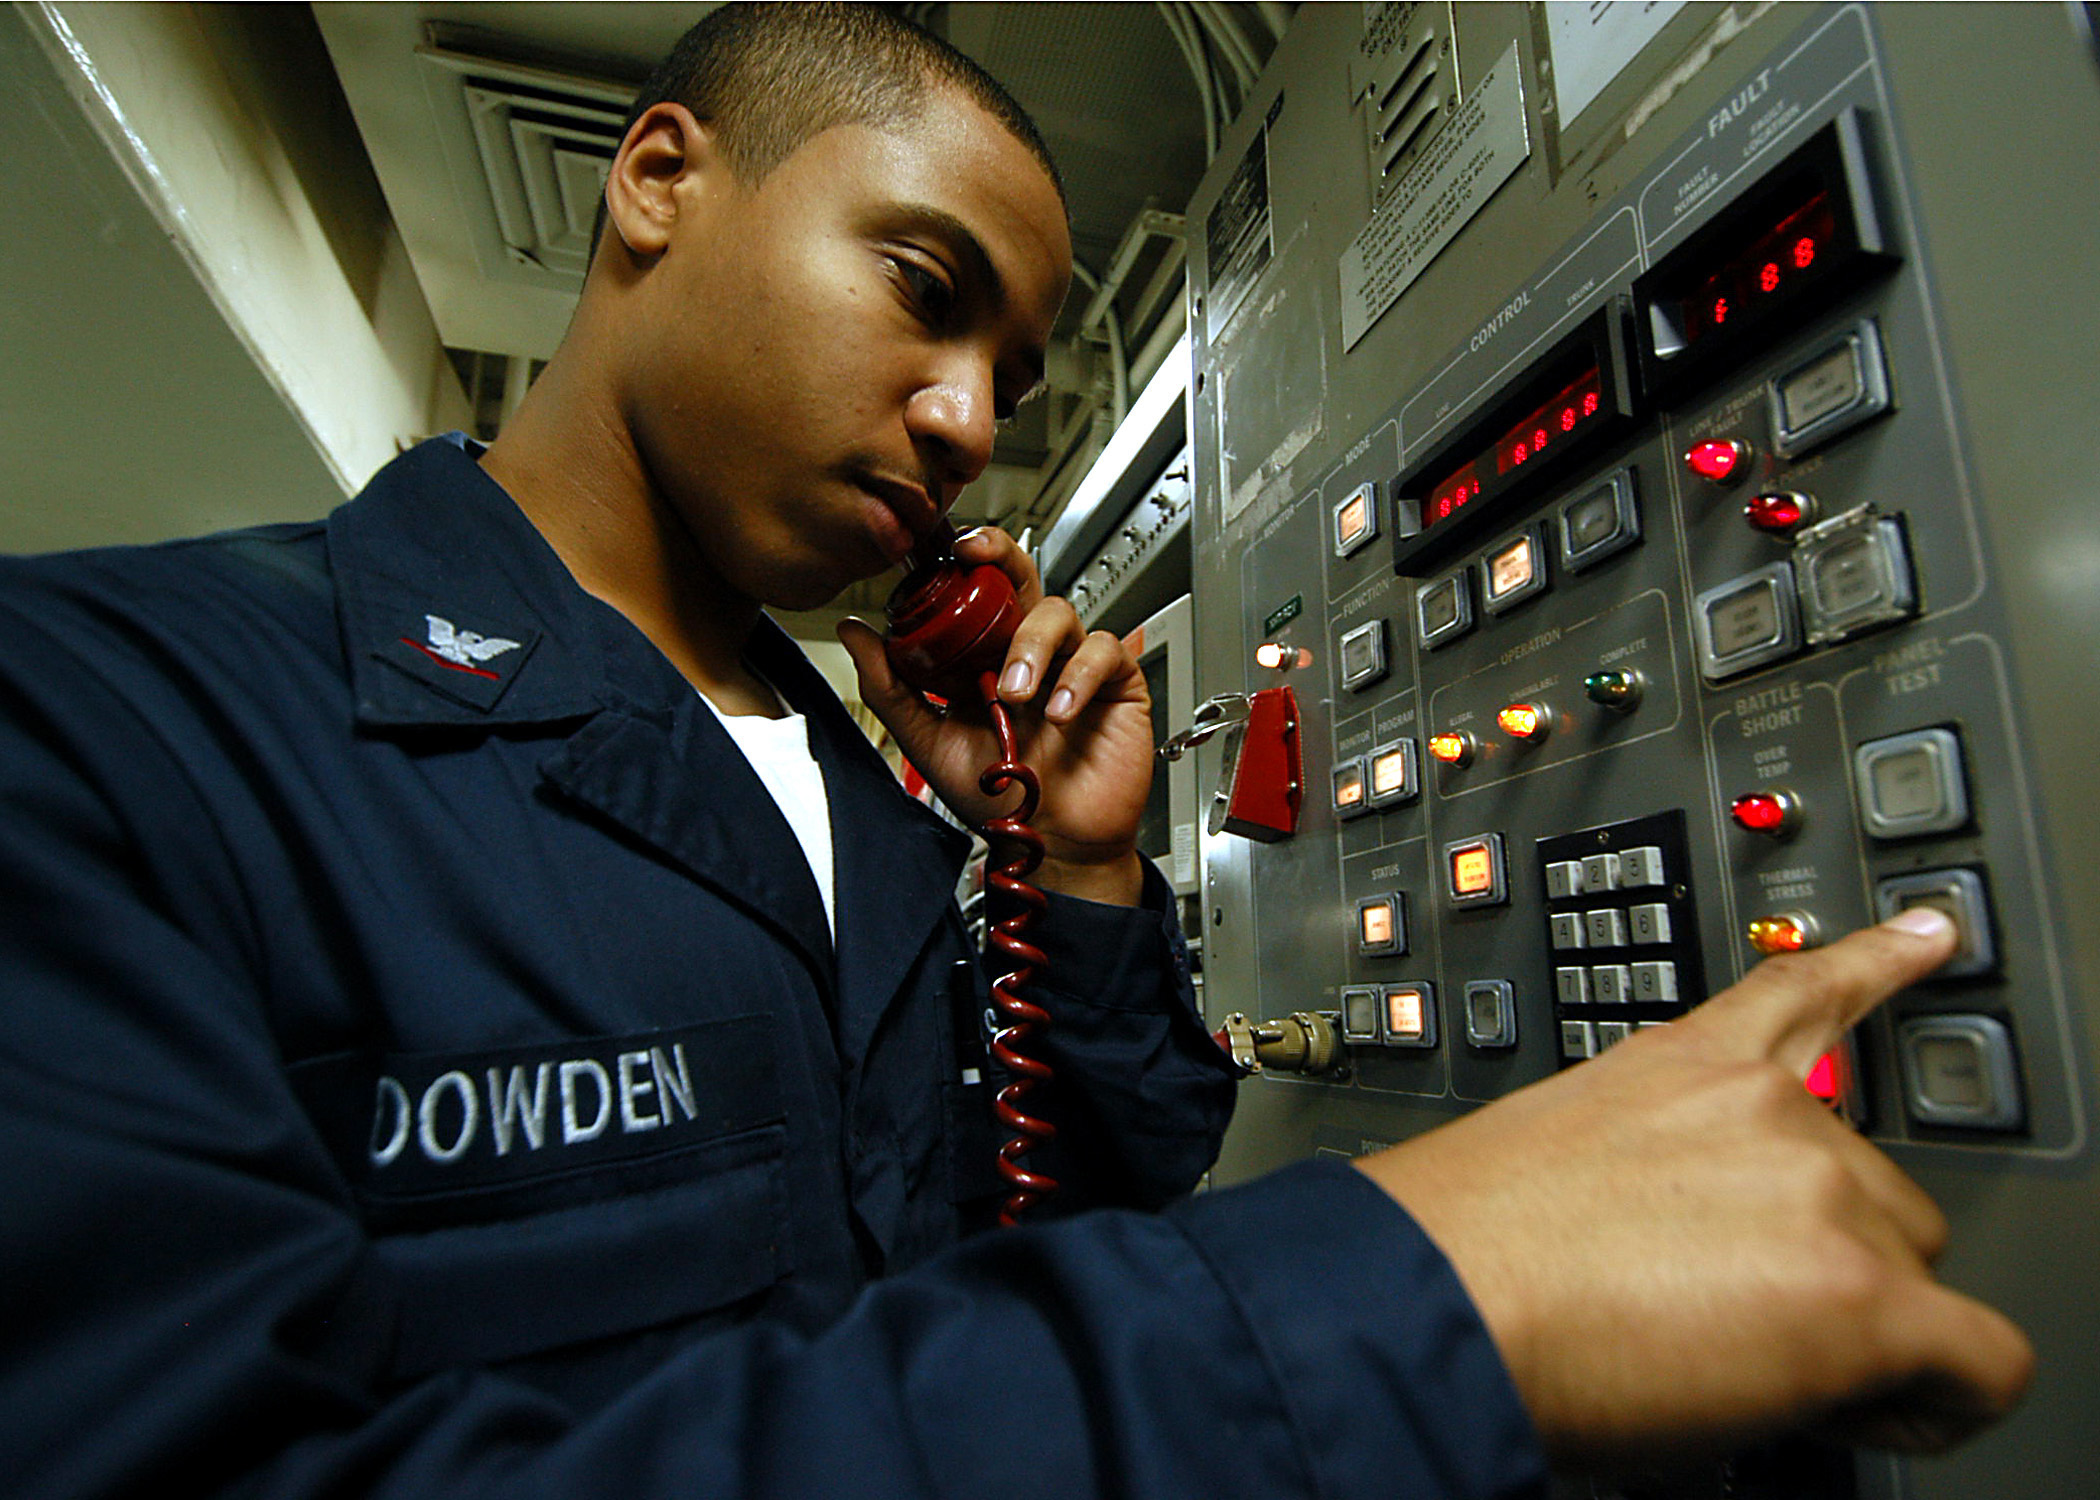 US Navy 040210-N-6278K-001 Information Systems Technician 3rd Class Anthony Dowden from Brooklyn, N.Y., conducts a communications check on a UHF circuit aboard USS George Washington (CVN 73)